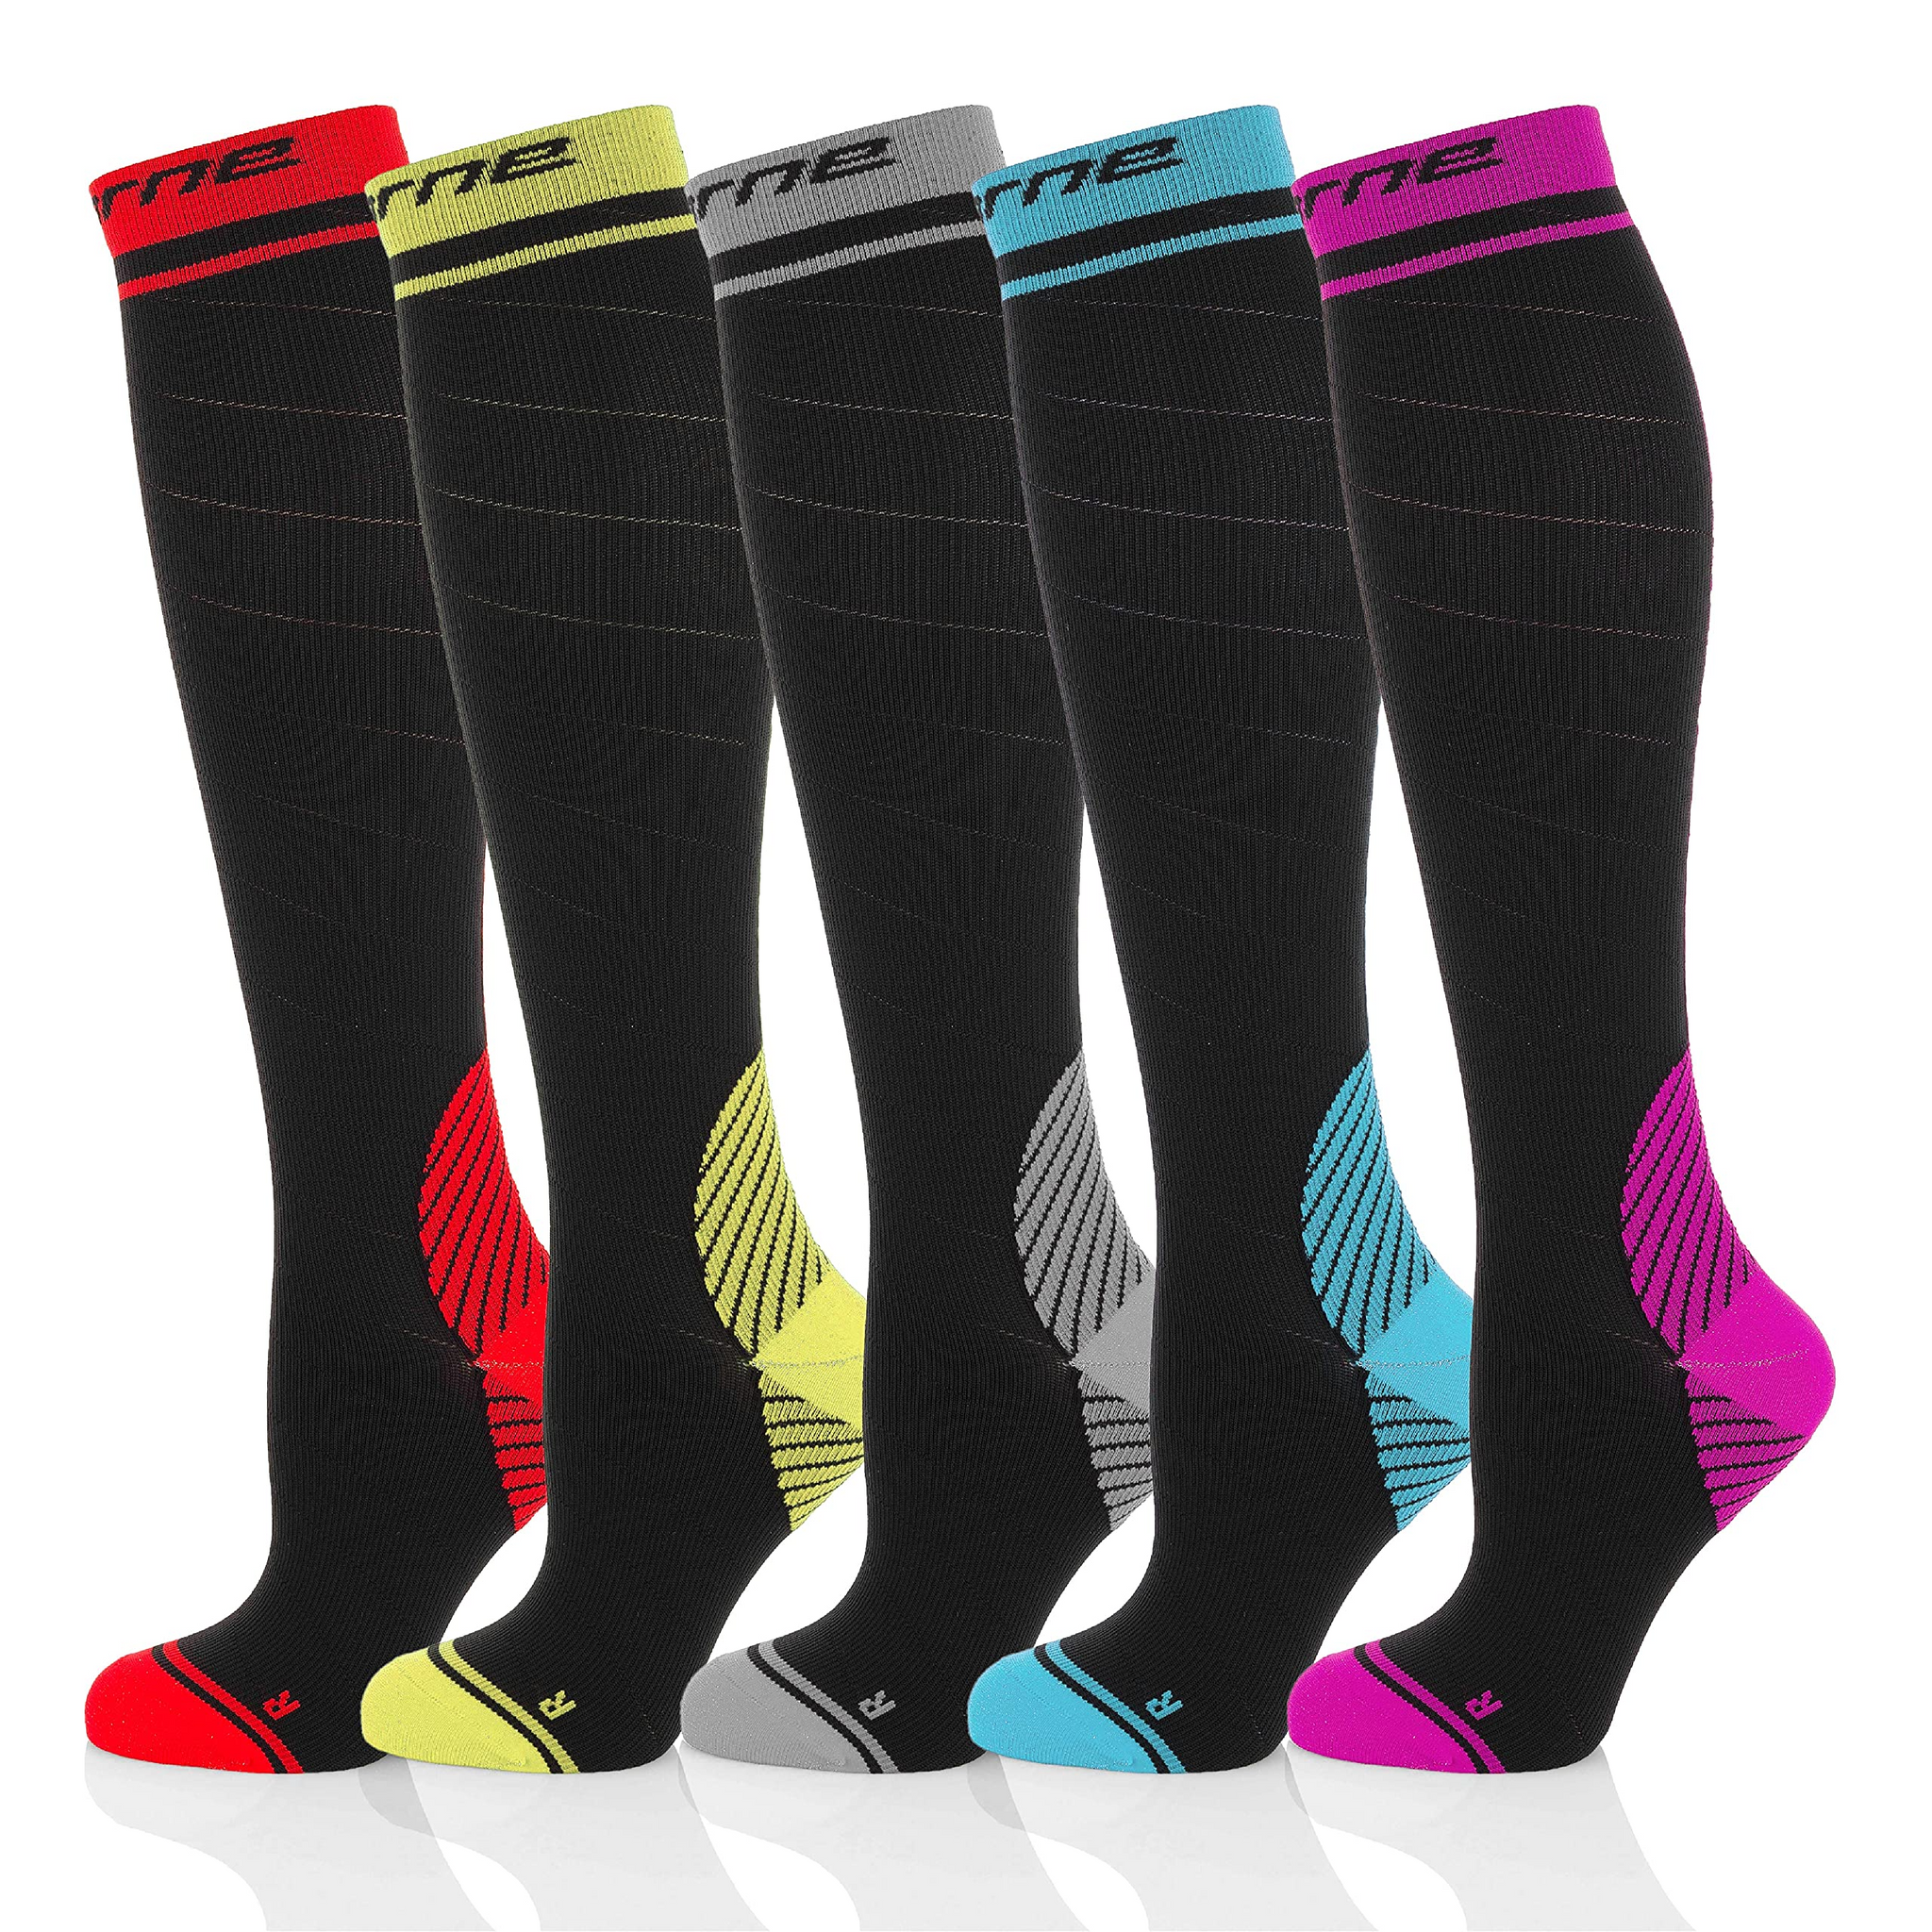 Licorne Compression Thrombosis Support Stockings Women and Men Compression Socks for Sports Flight Running Travel Improve Blood Circulation